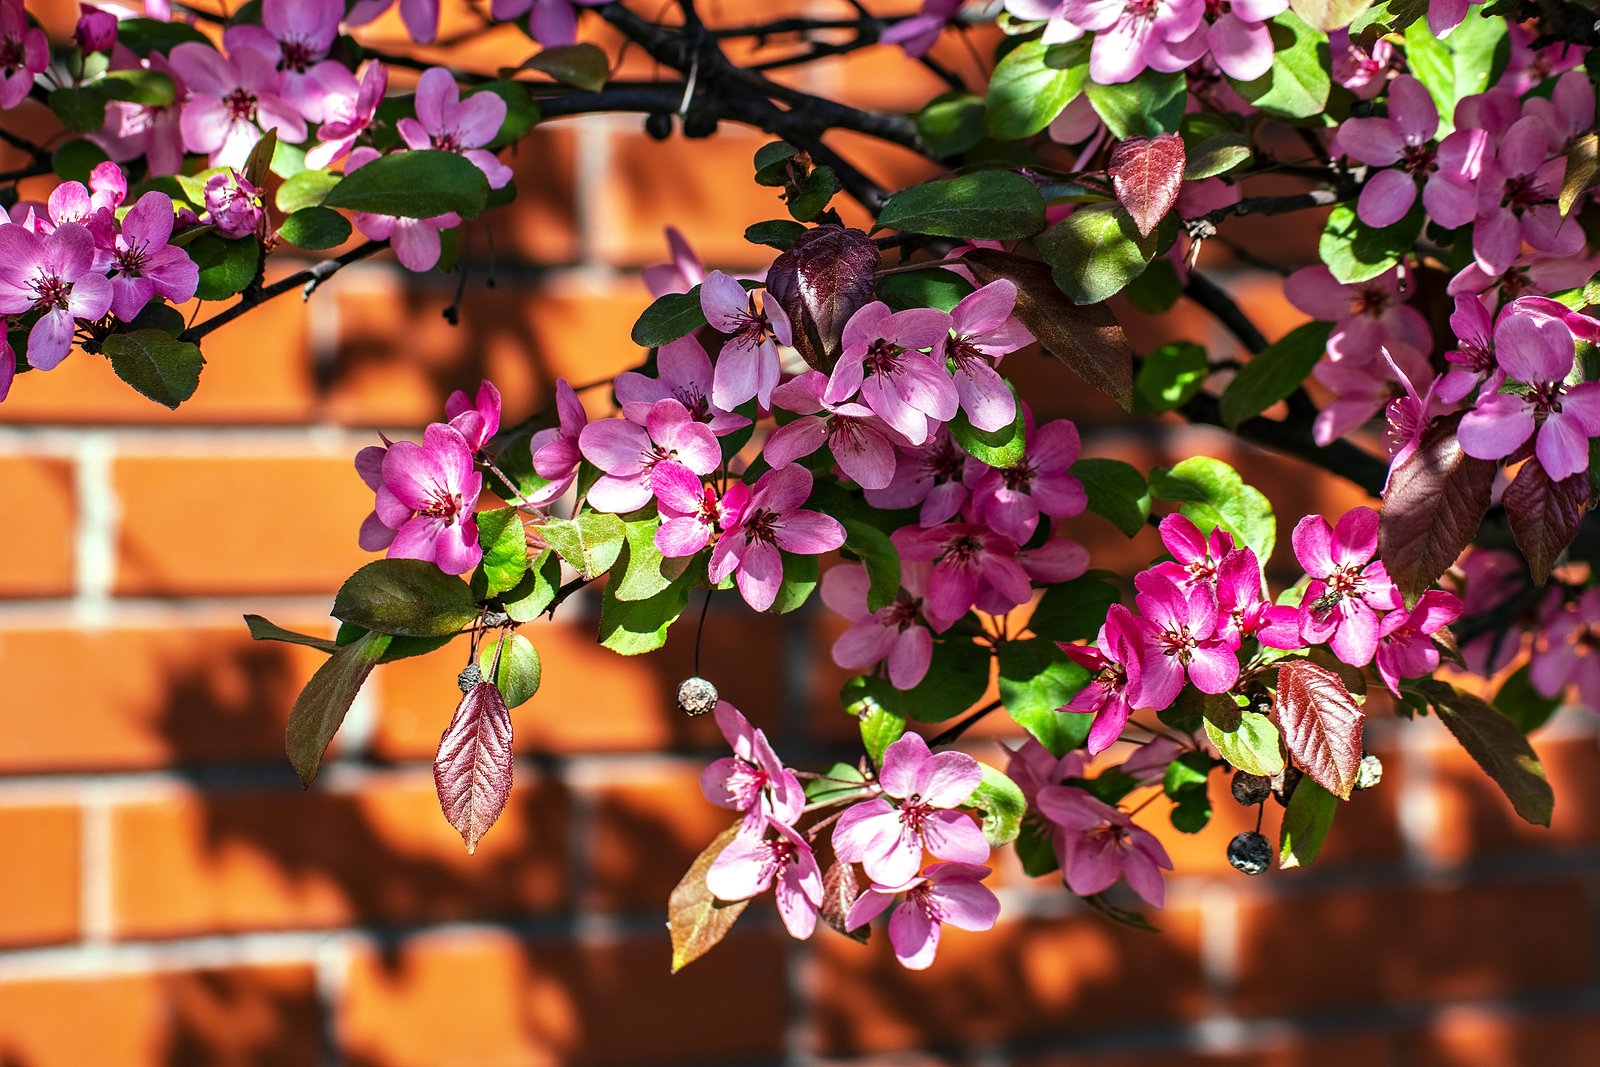 Bright Pink-Flowers-Of-Apple-Tree with brick wall in background Renaissance DC